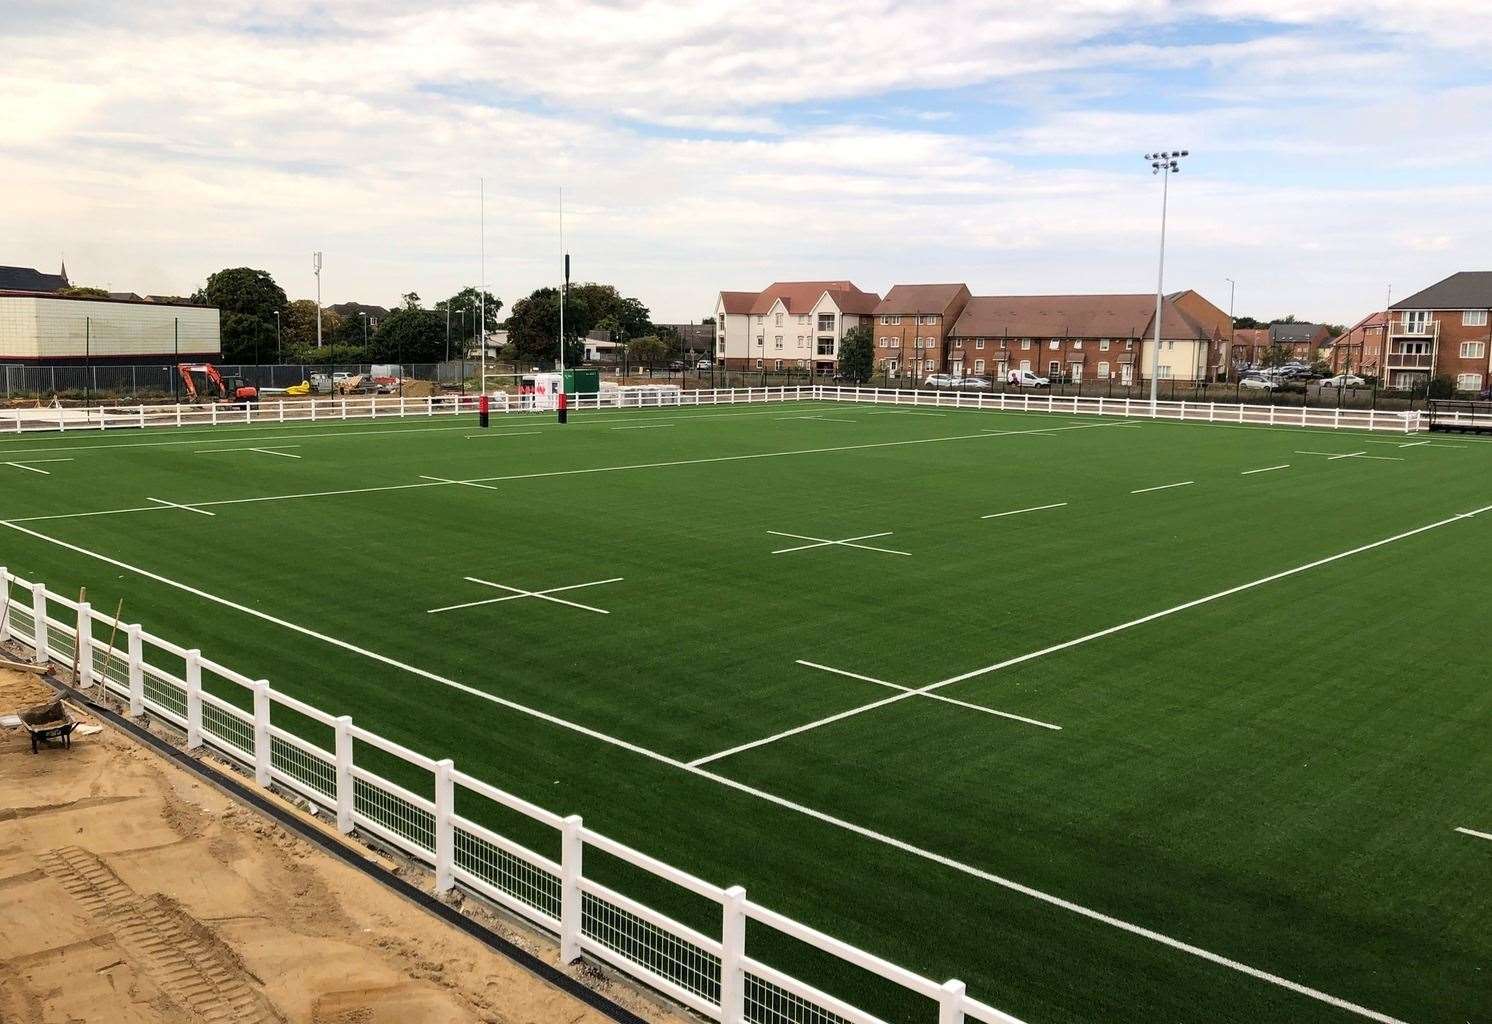 A 3G pitch will be one of the new pitches at Dartford Valley rugby club. Picture: Dartford Valley Rugby Club